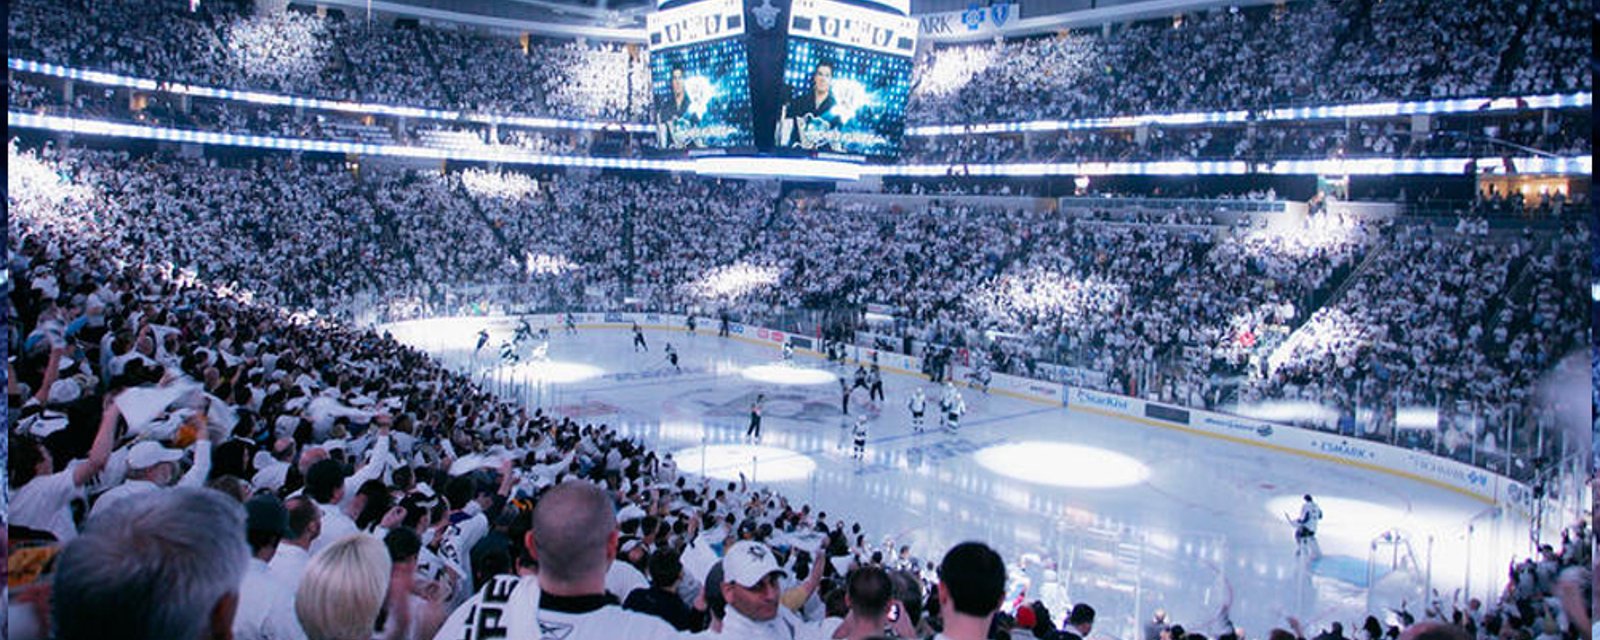 NHL’s new plan would allow for thousands of fans in attendance at games